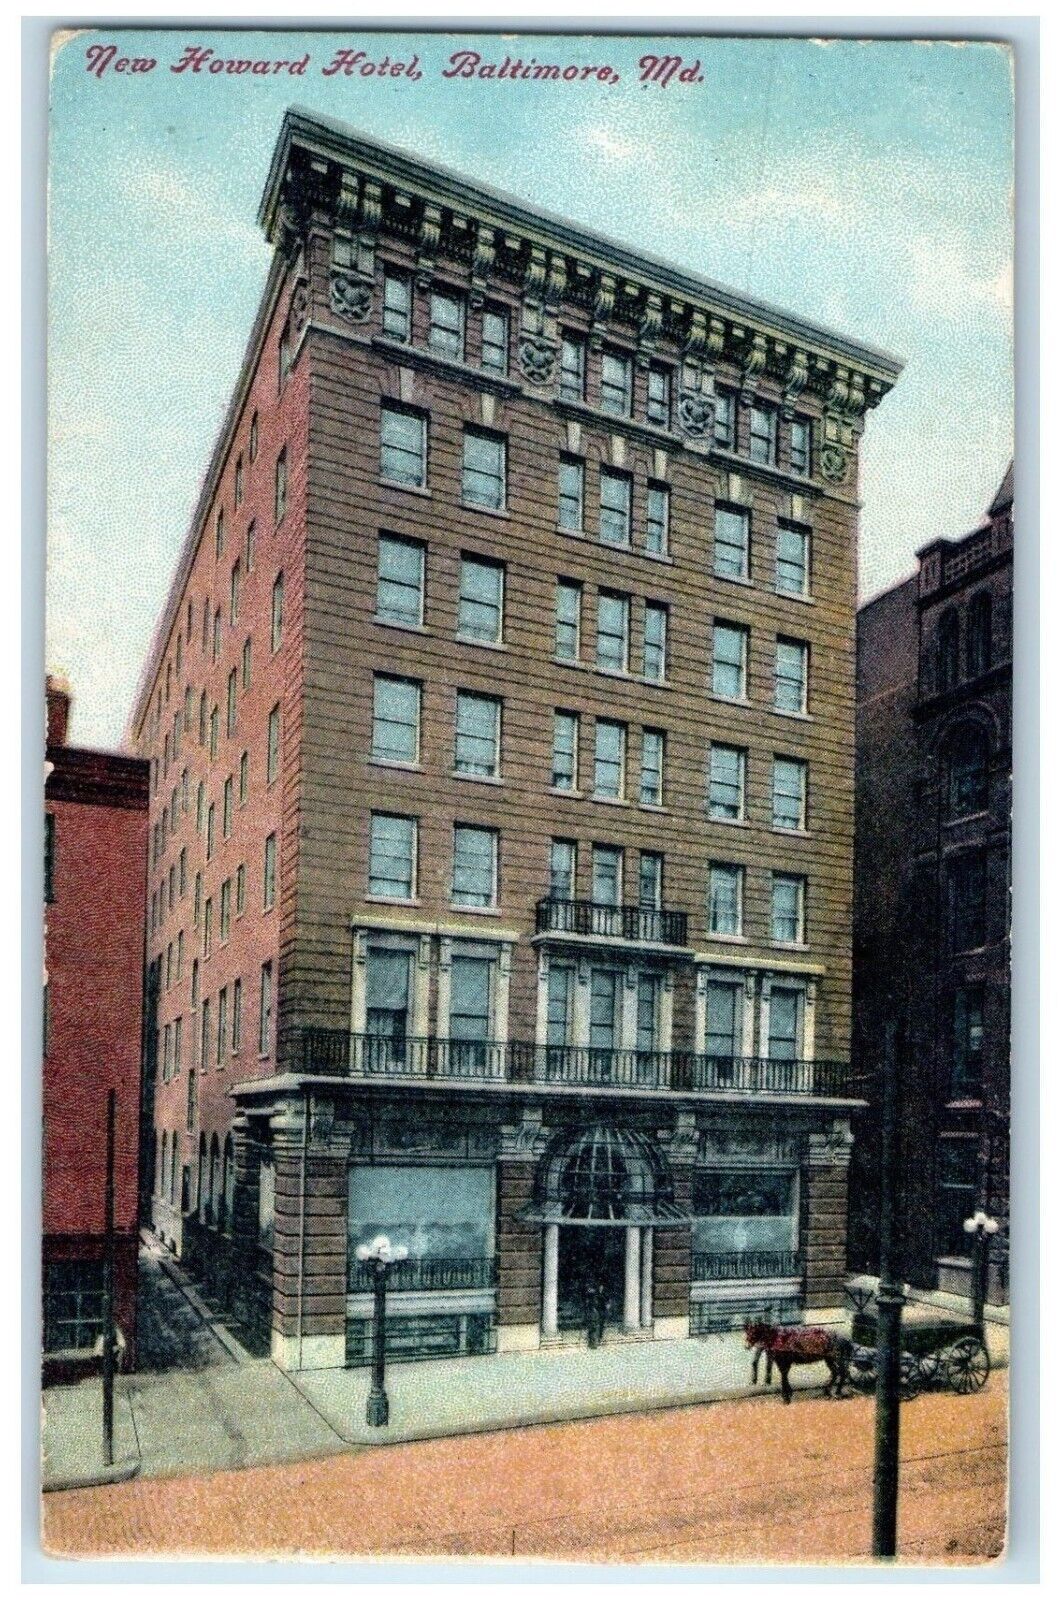 1911 New Howard Hotel Building Street View Baltimore Maryland MD Posted Postcard